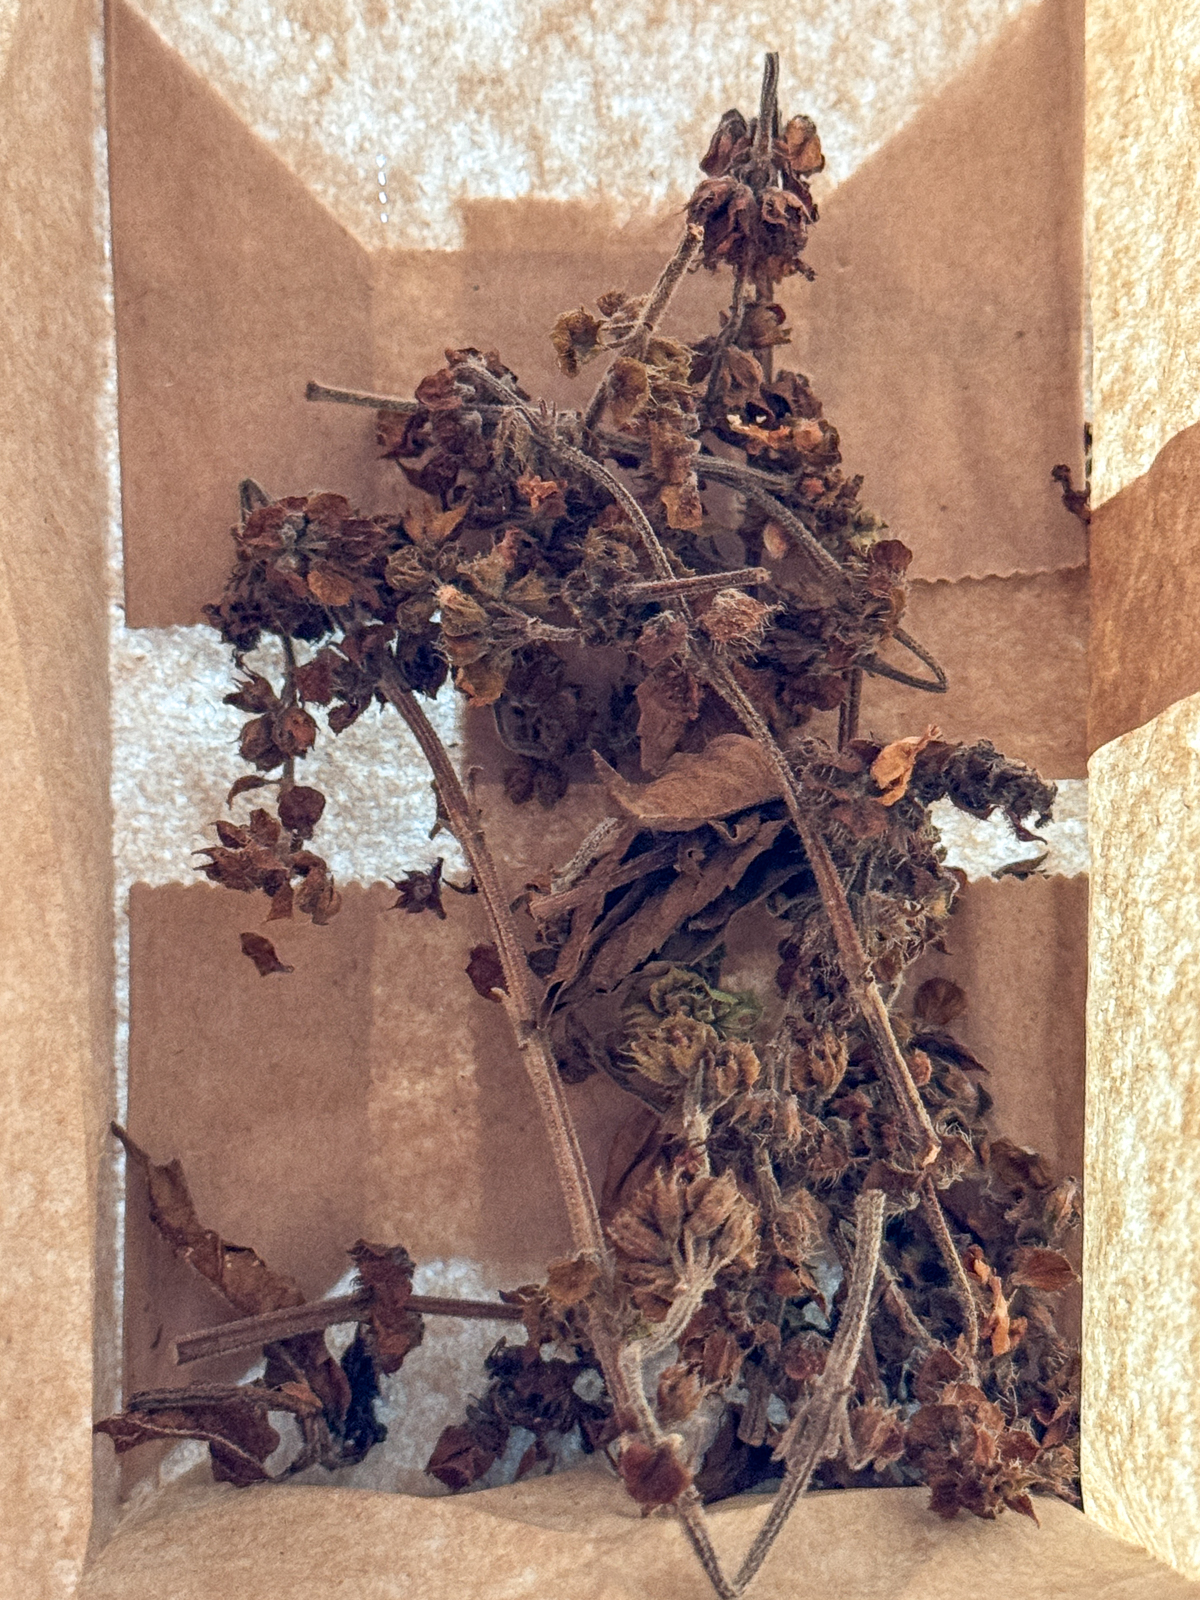 basil seed pod stems drying in a paper bag